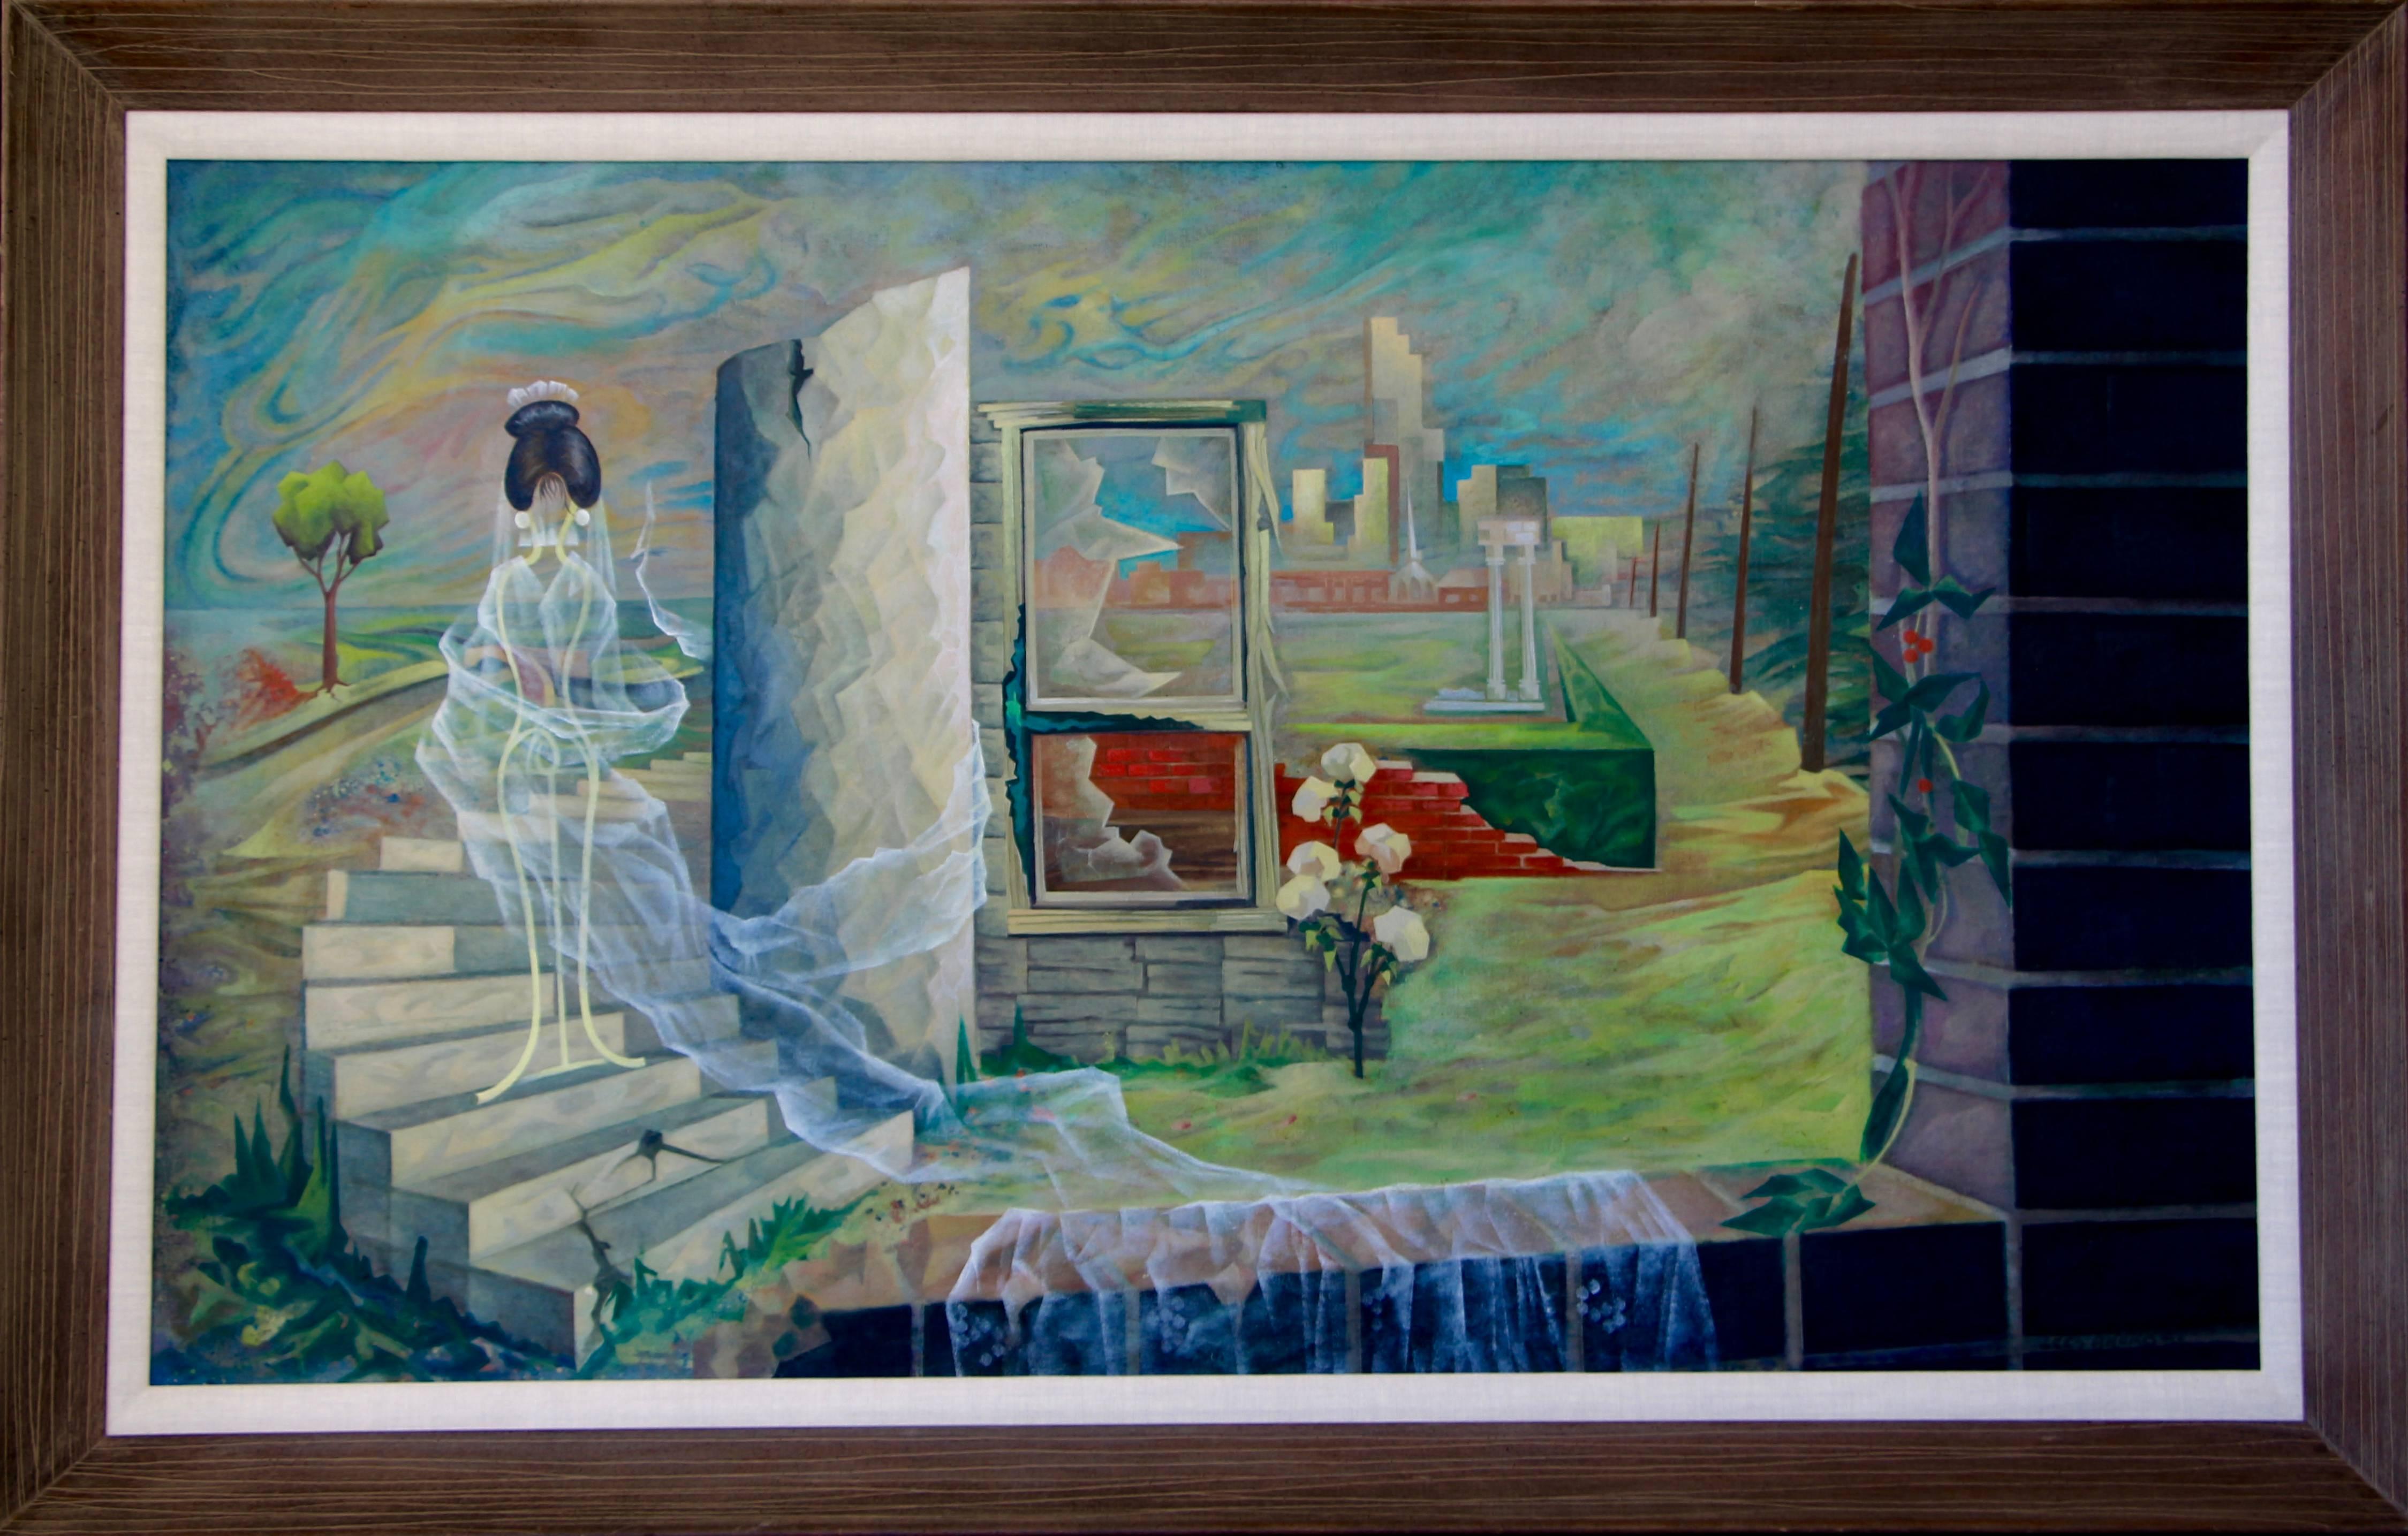 A wonderful surrealist Mid-Century painting by the noted Dutch/American artist Artist Cees Brokke. It it's original frame, we did have to have the linen liner replaced.
From an old ny times article is this blurb about the artist Several miles away,